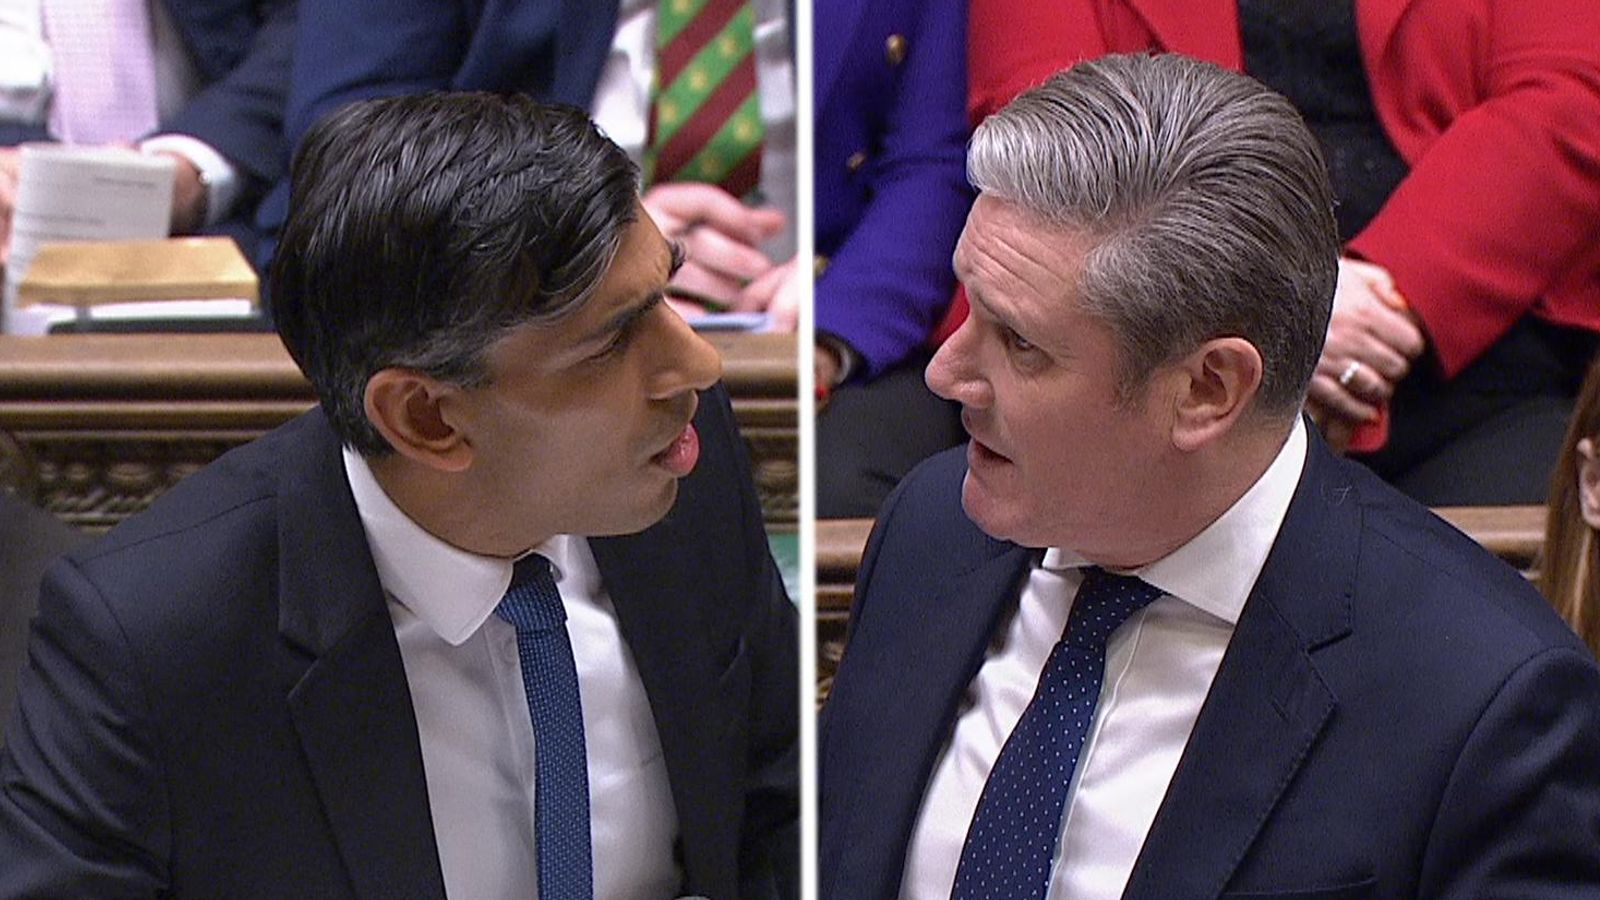 PMQs: Sir Keir Starmer calls on Rishi Sunak to apologise for 'lethal chaos' in NHS